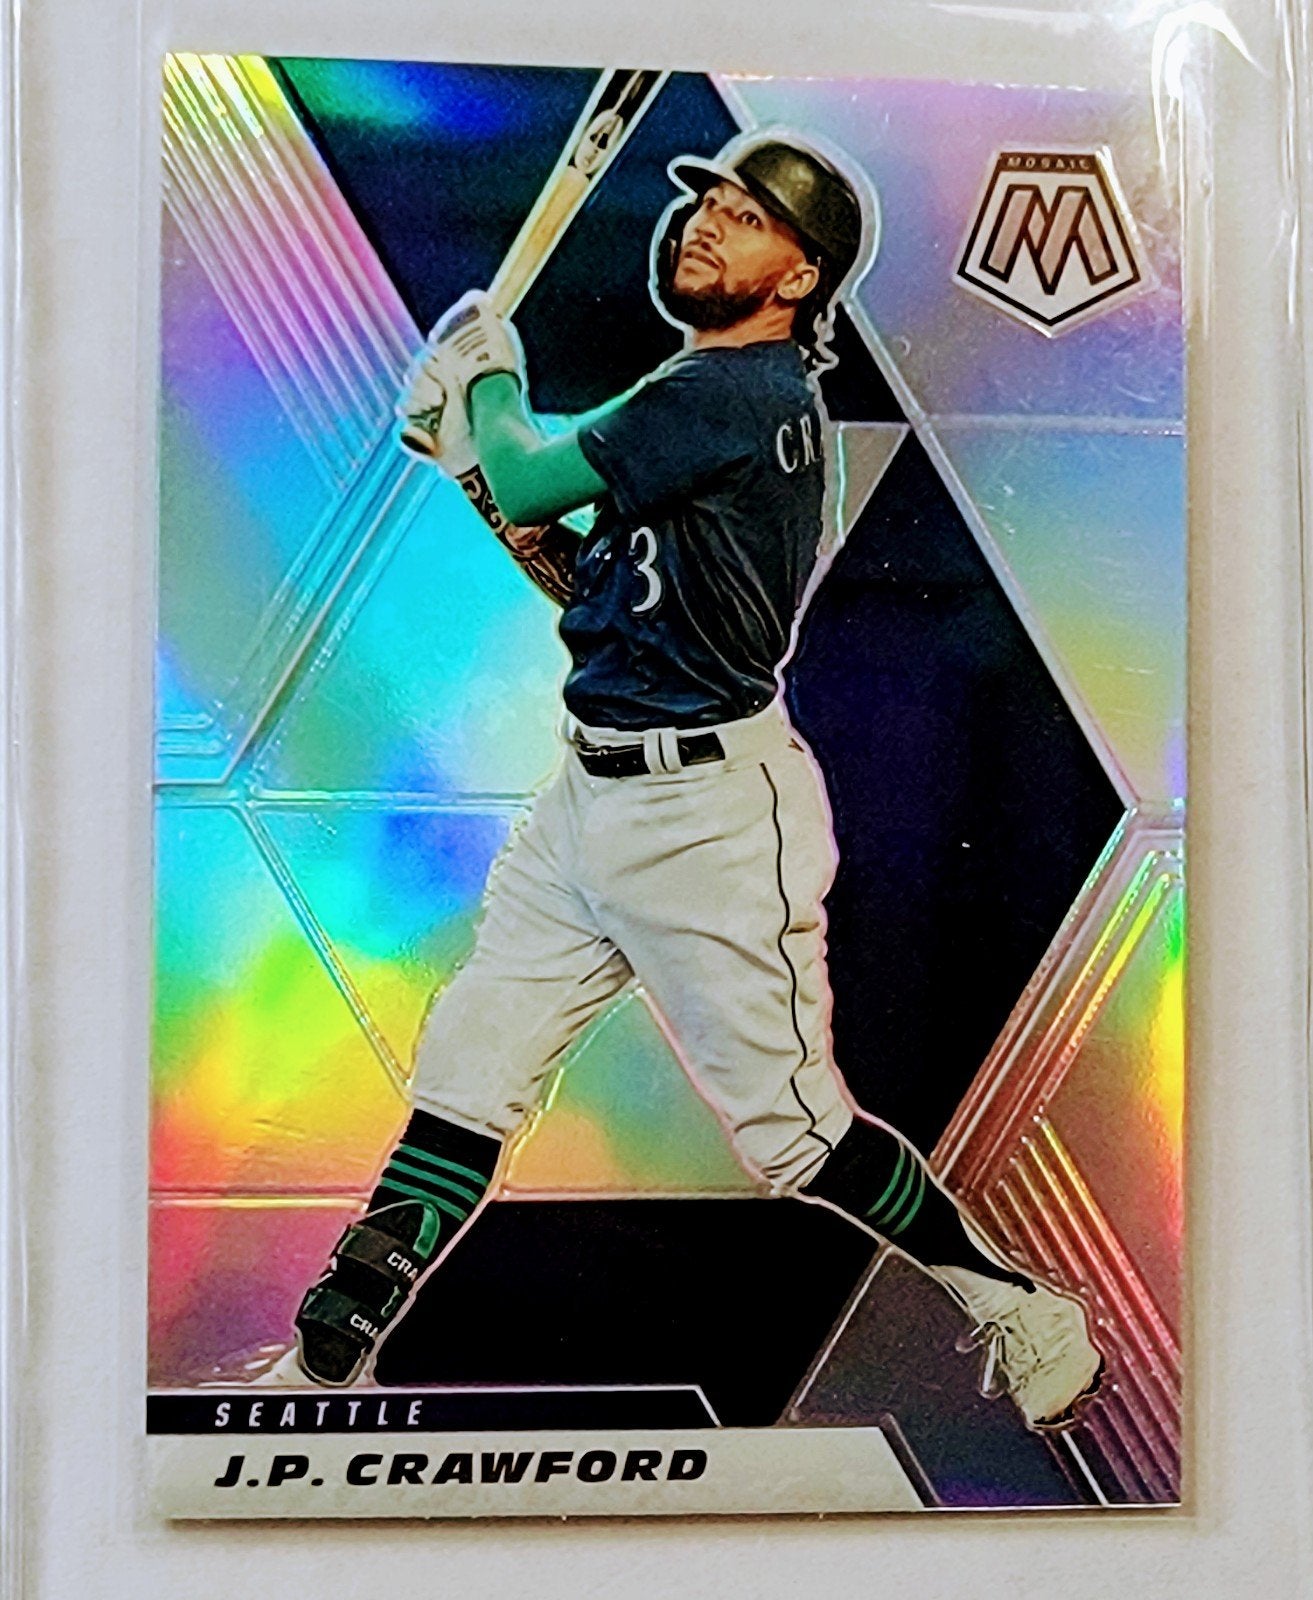 2021 Panini Mosaic J.P. Crawford Refractor Baseball Card AVM1 simple Xclusive Collectibles   